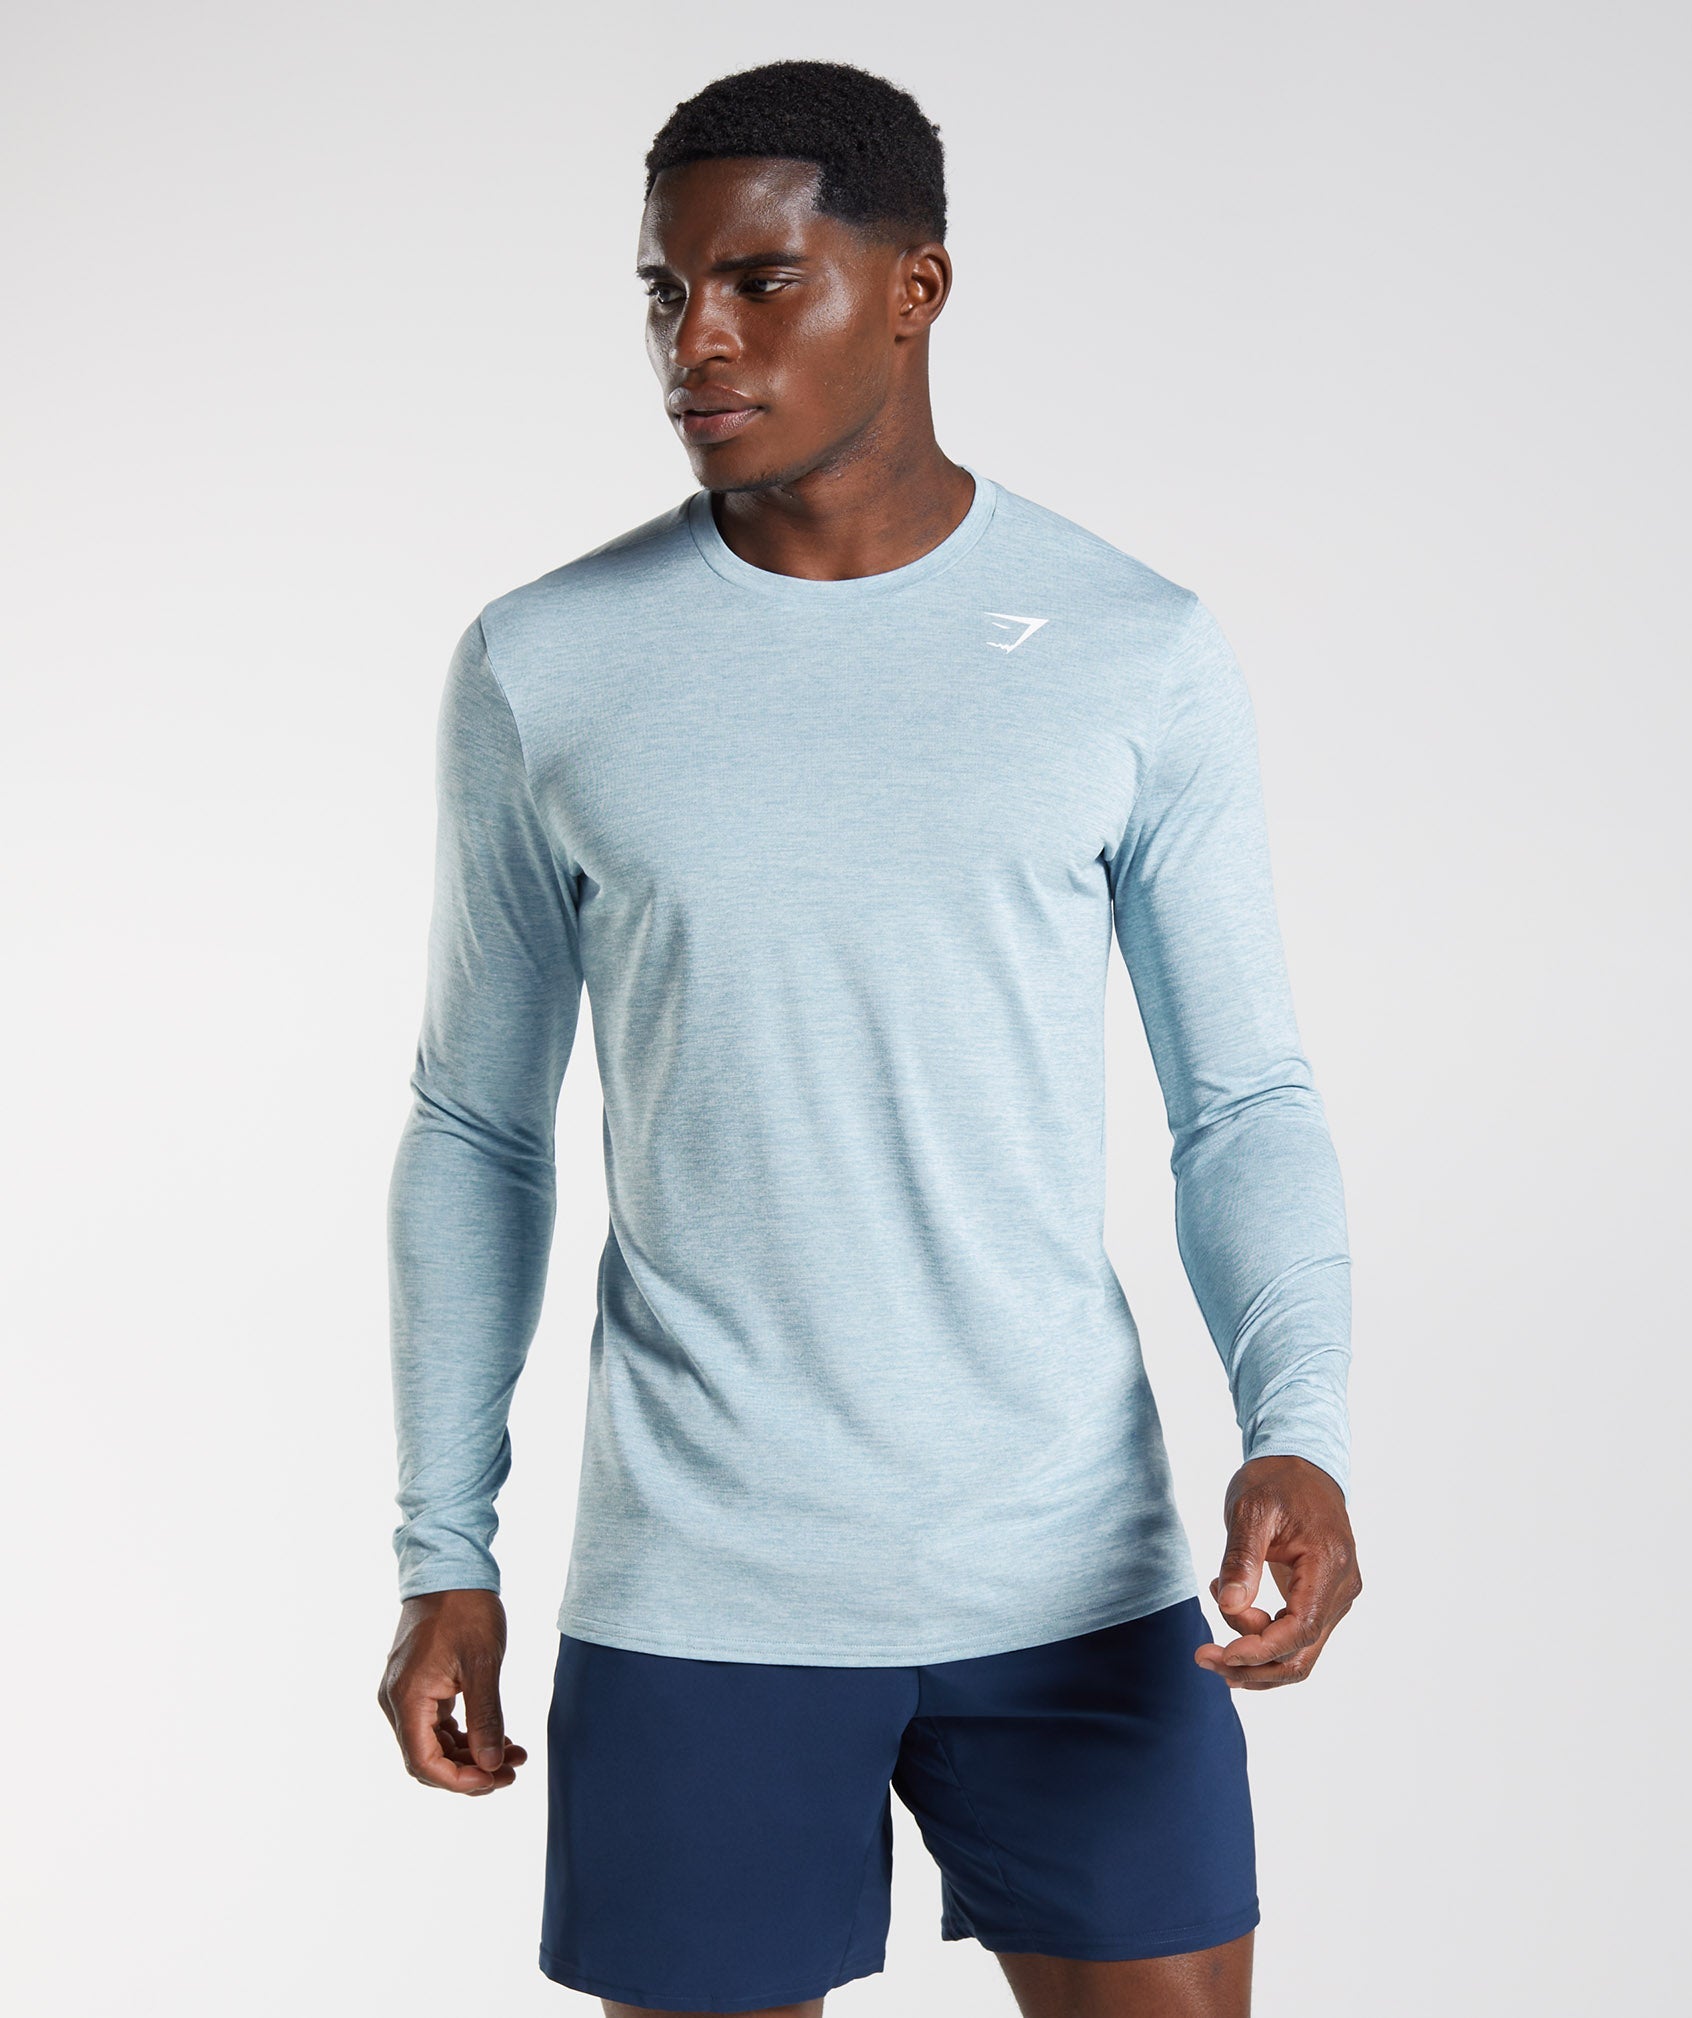 Arrival Marl Long Sleeve T-Shirt in Iceberg Blue/Icy Blue Marl - view 1